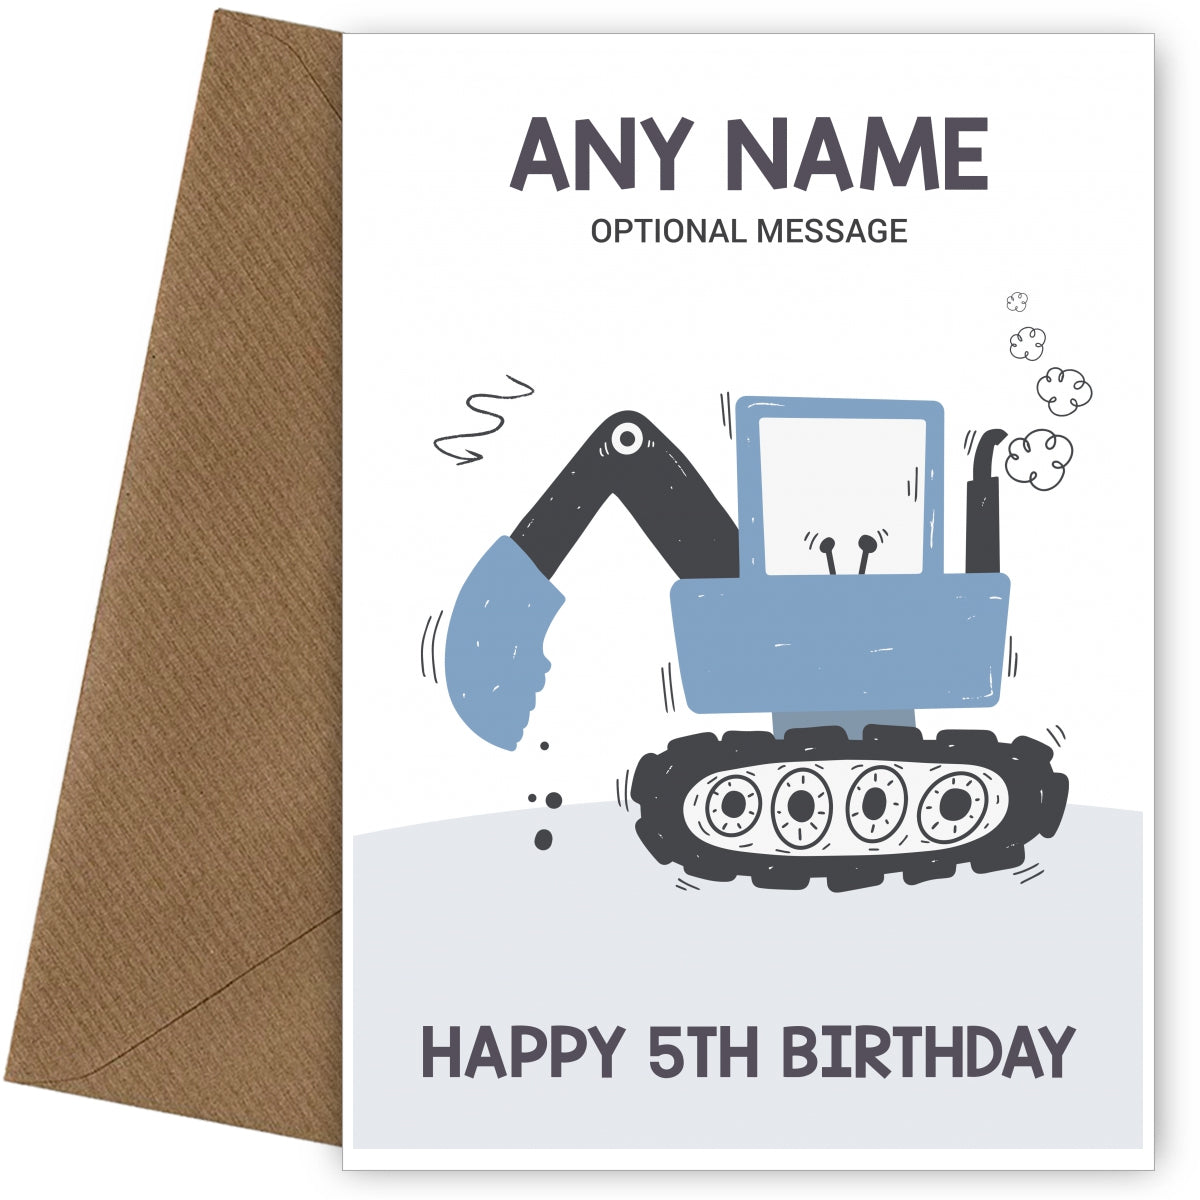 5th Birthday Card for Any Name - Blue Digger